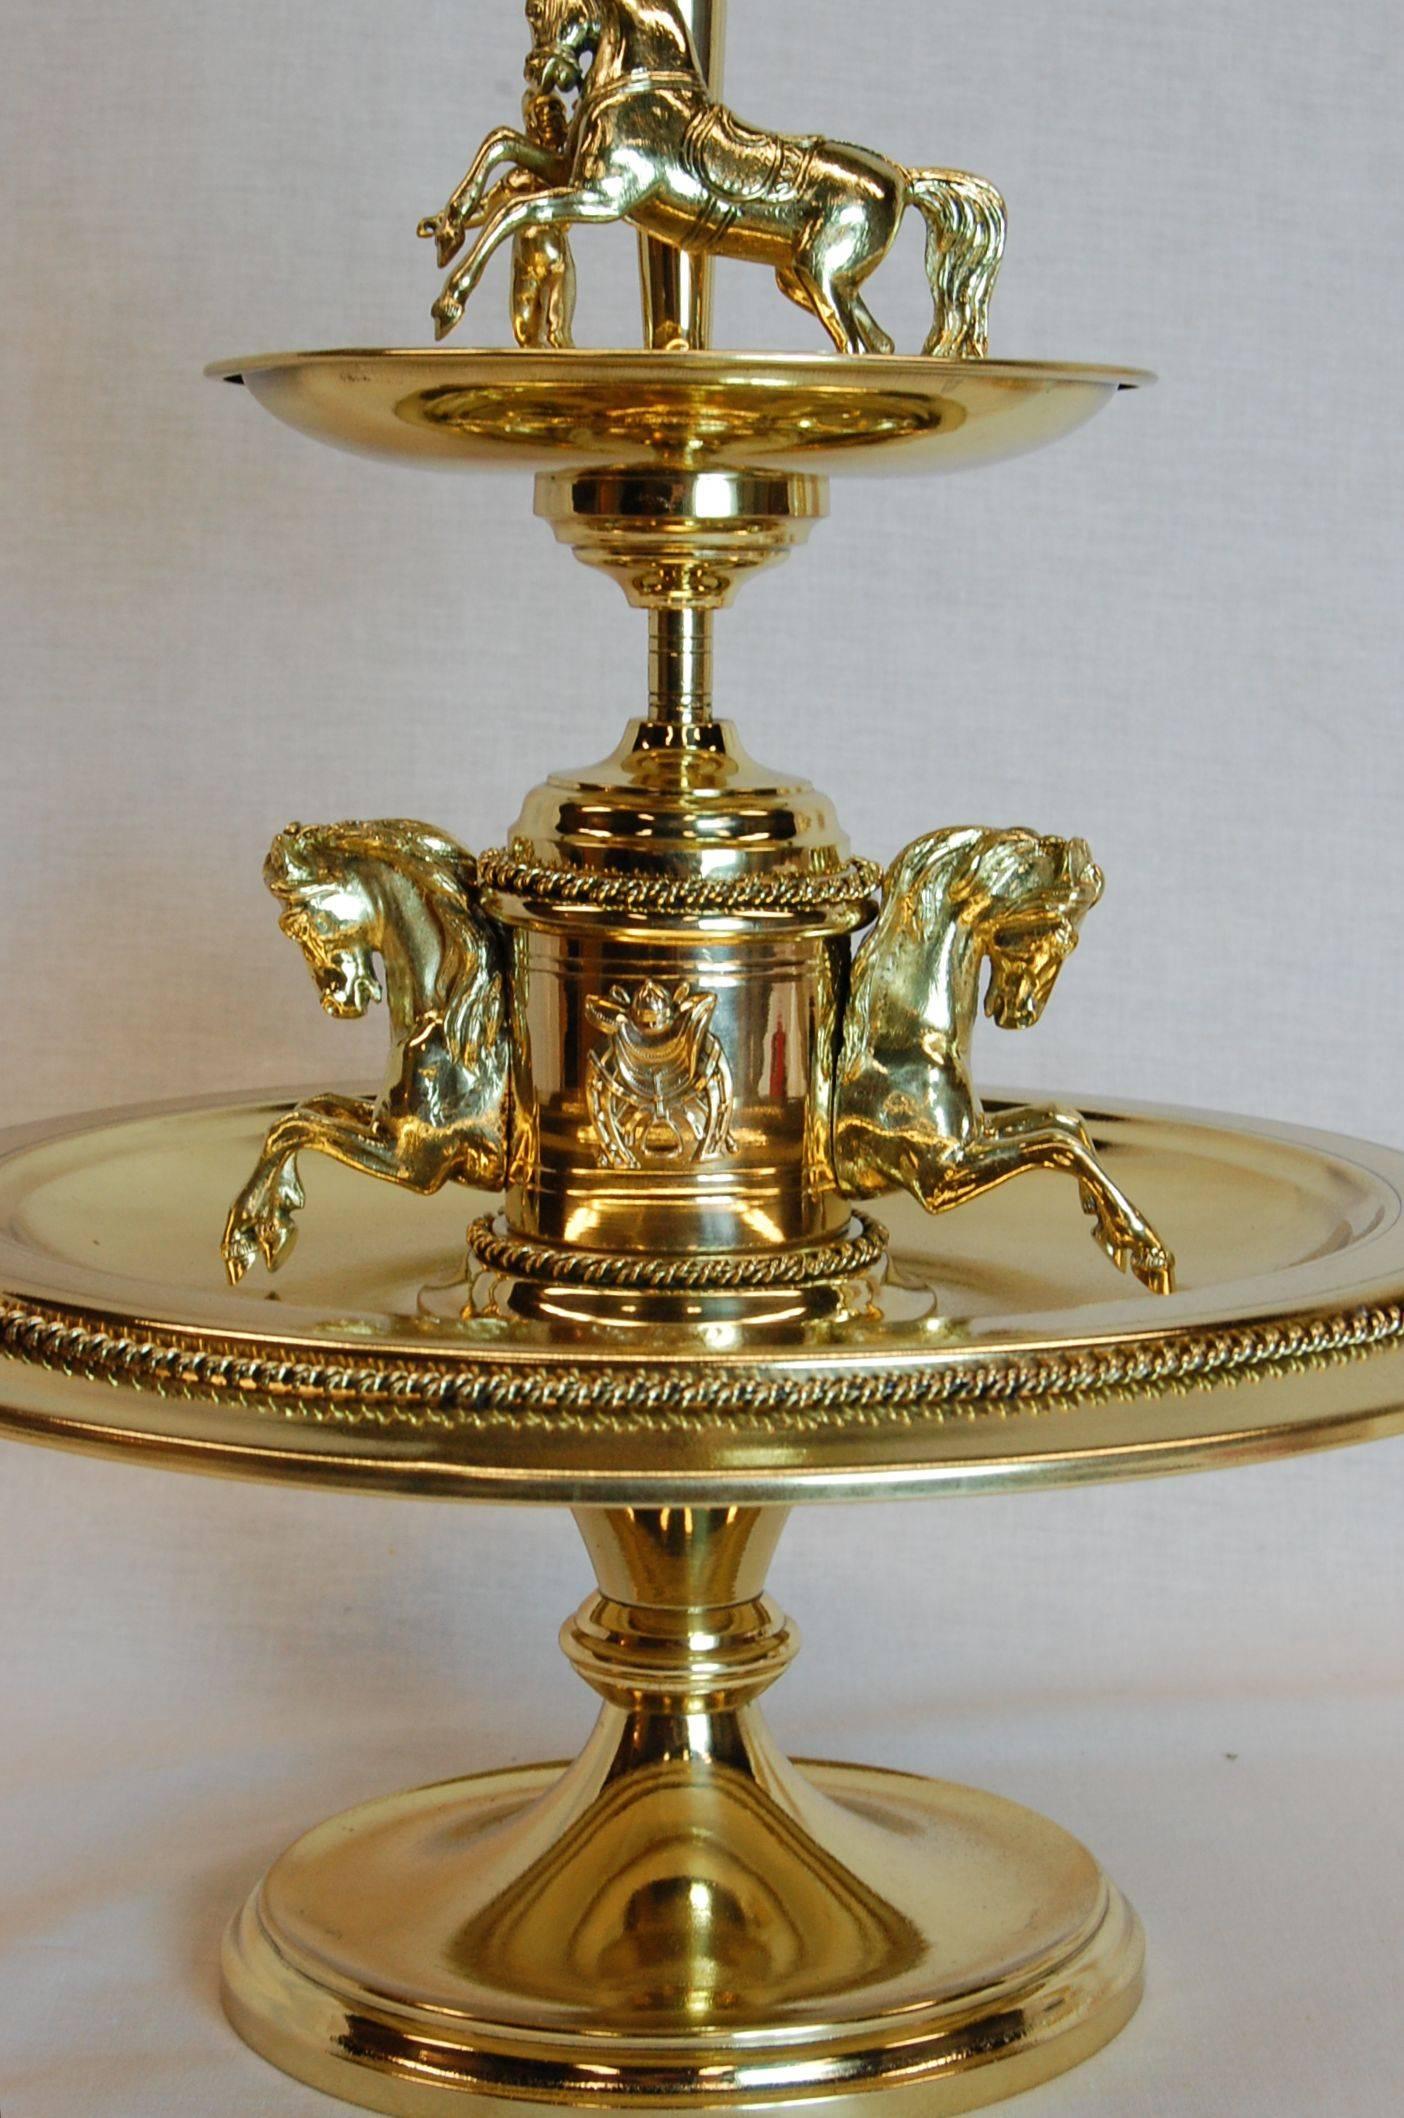 A well-made mid-late 19th century epergne with race horse figures and a glass epergne. Highly detailed jockey and horses with brass rope banding. Measure: The height without the glass is 14 3/4 inches. Just polished and lacquered.